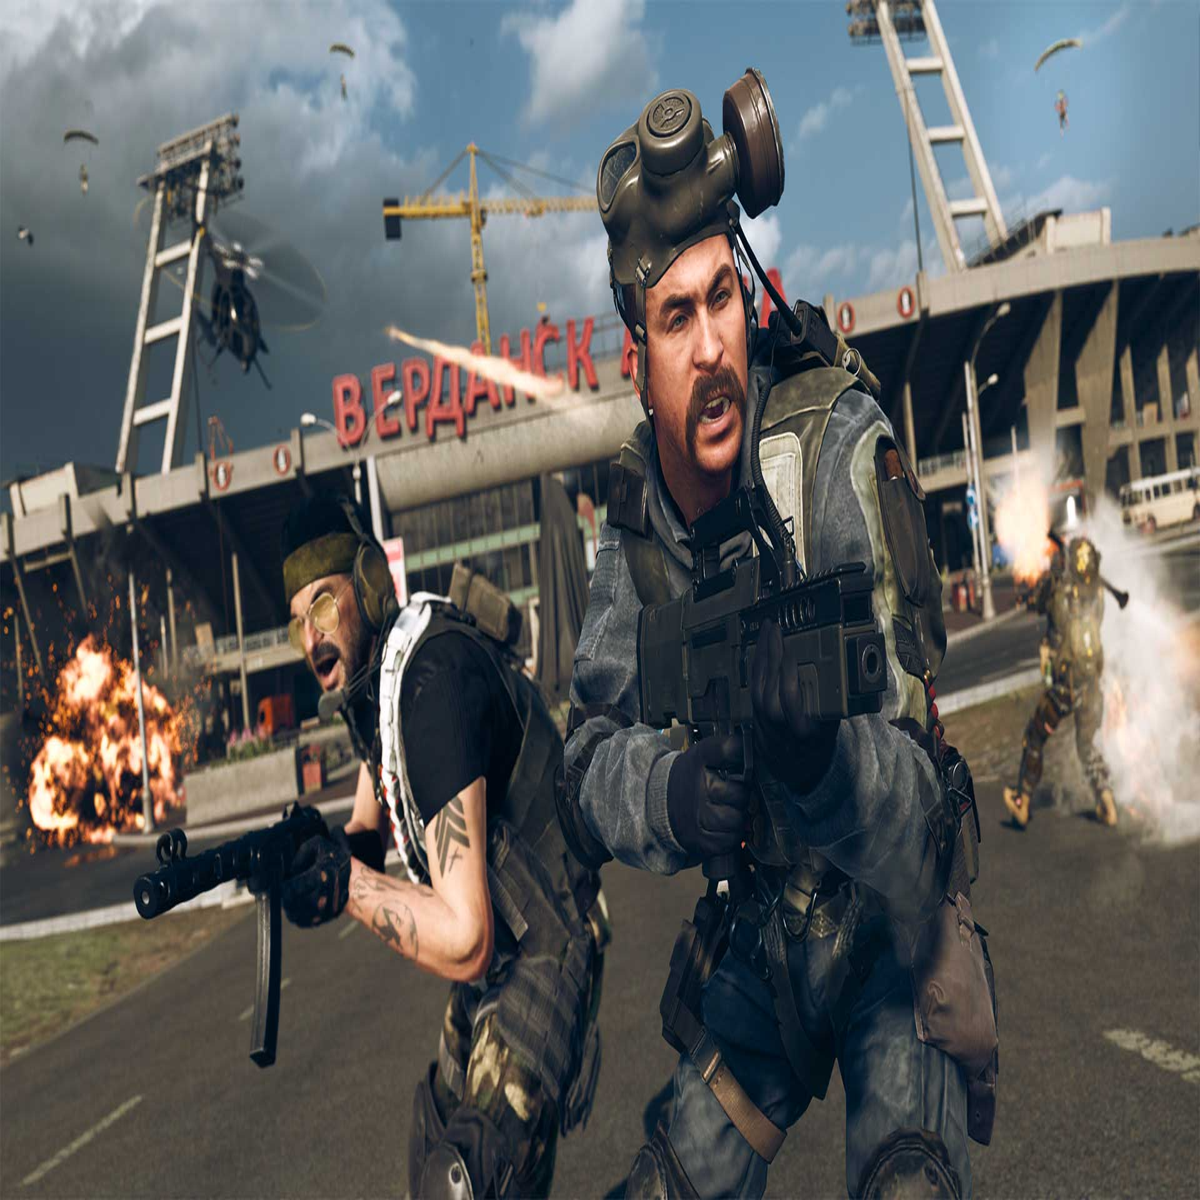 Report claims Call of Duty 2023 is happening